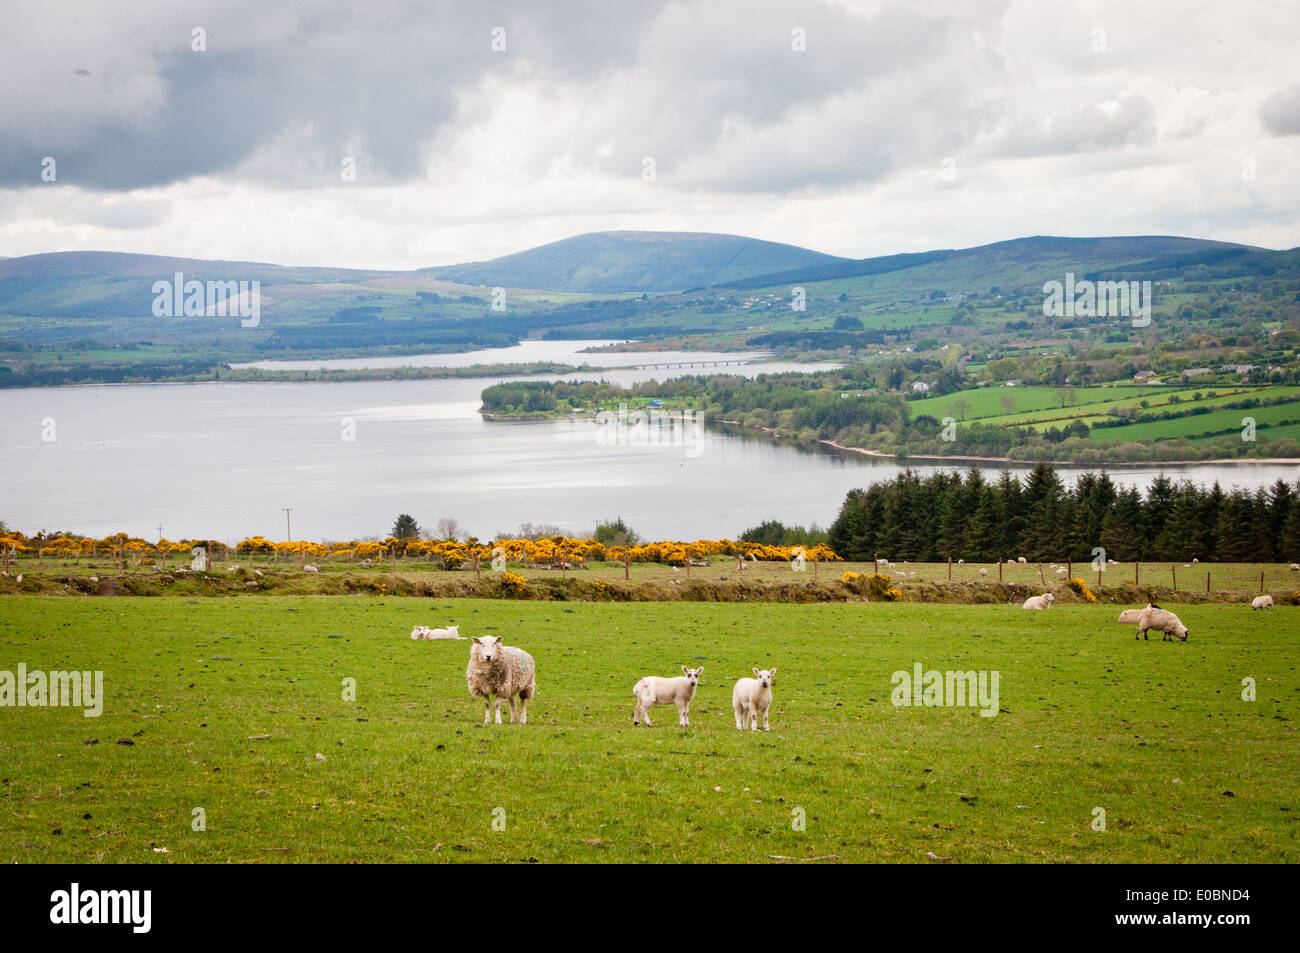 Grazing Sheep with Lambs on Green Hillside overlooking Lake Stock Photo